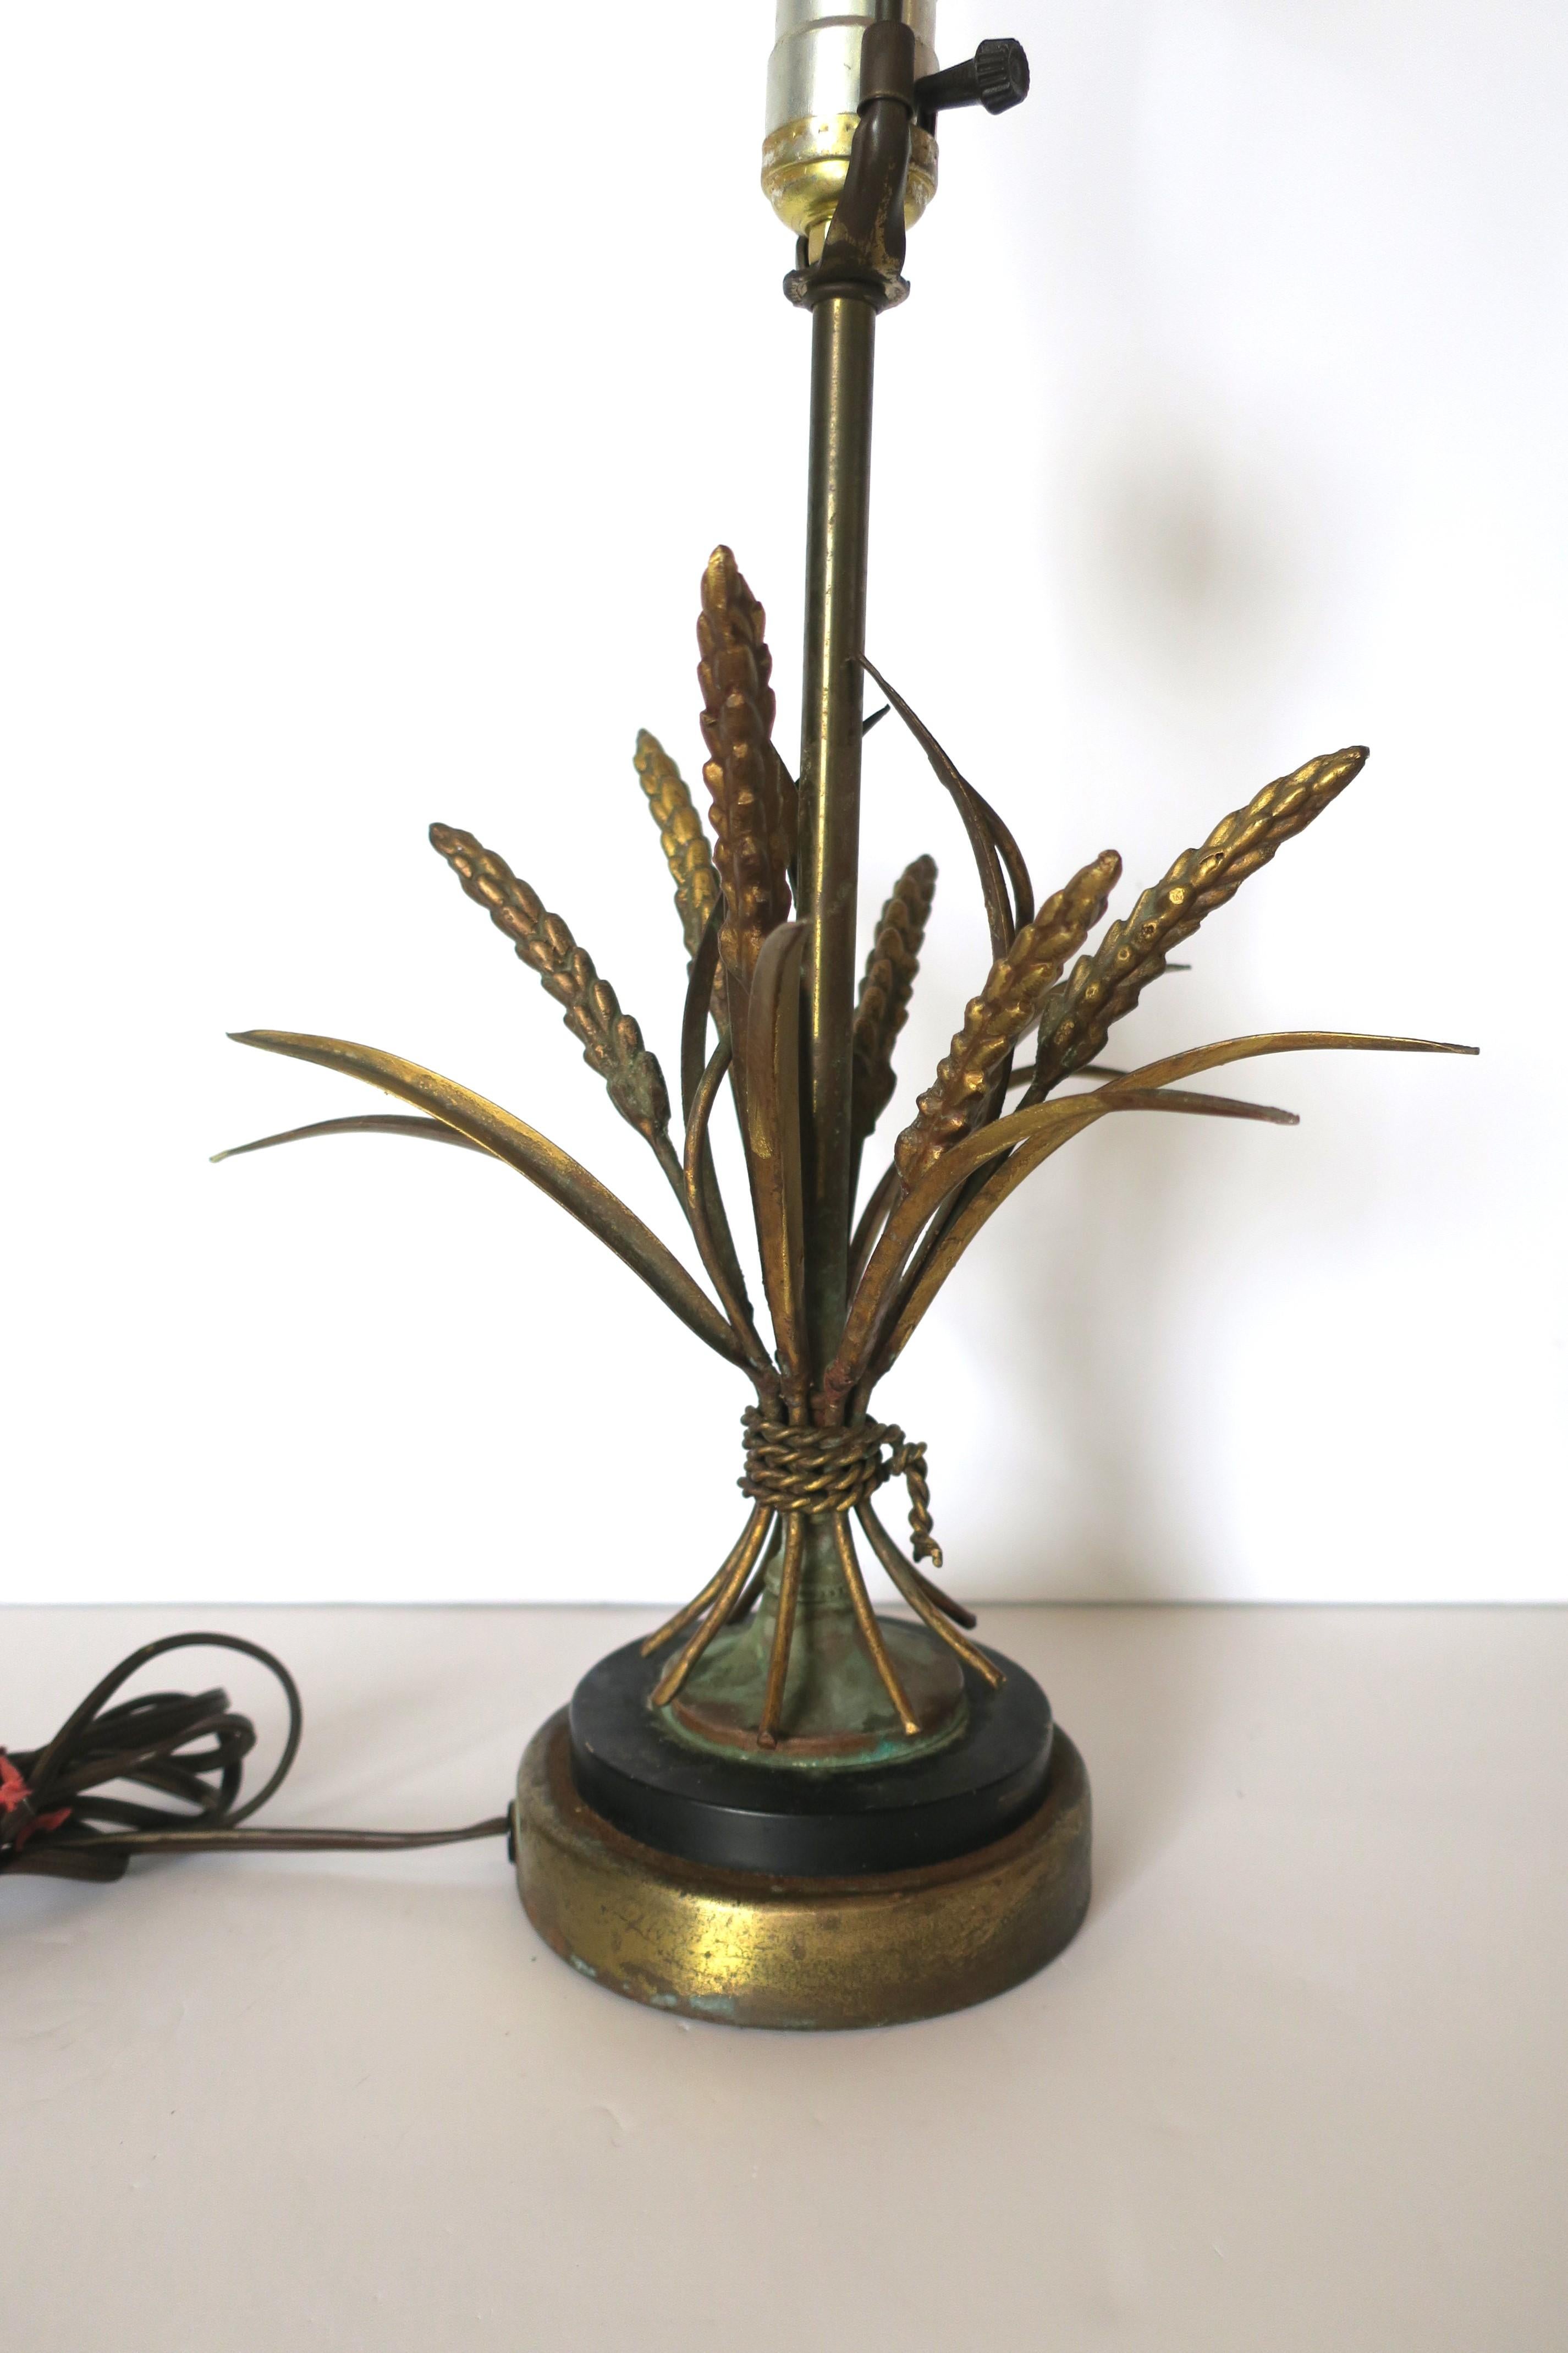 Italian Gold Gilt Brass Sheaf of Wheat Desk or Table Lamp After Maison Baguès For Sale 8